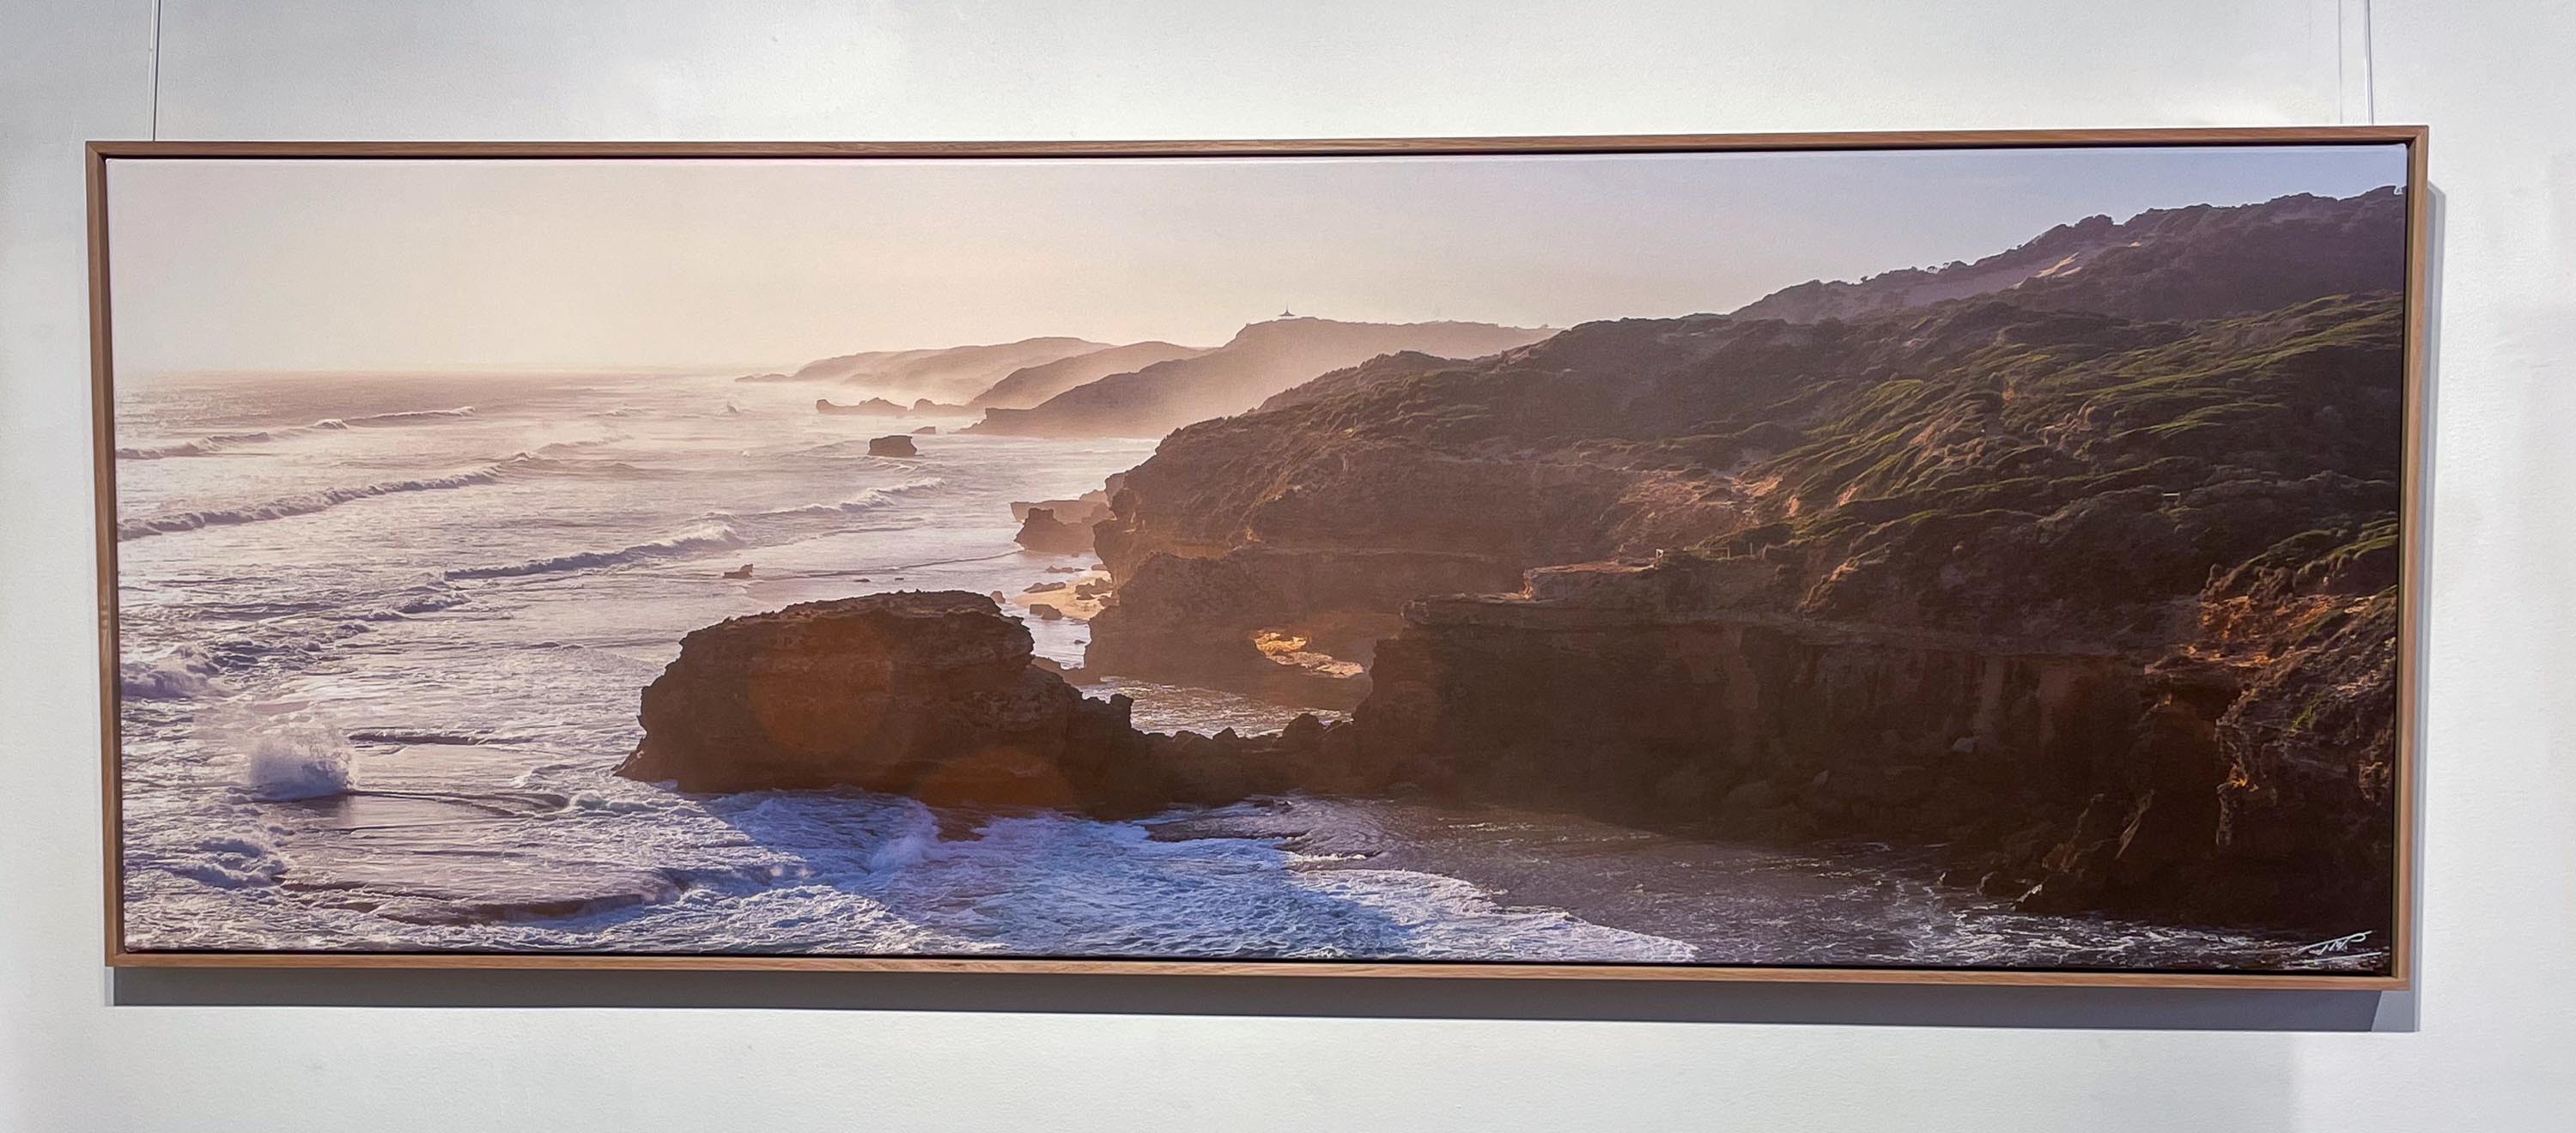 ARTWORK INSTOCK -  Jubilee Point Sorrento - 200 x 66cms Canvas Framed Print Raw Oak AVAILABLE TODAY